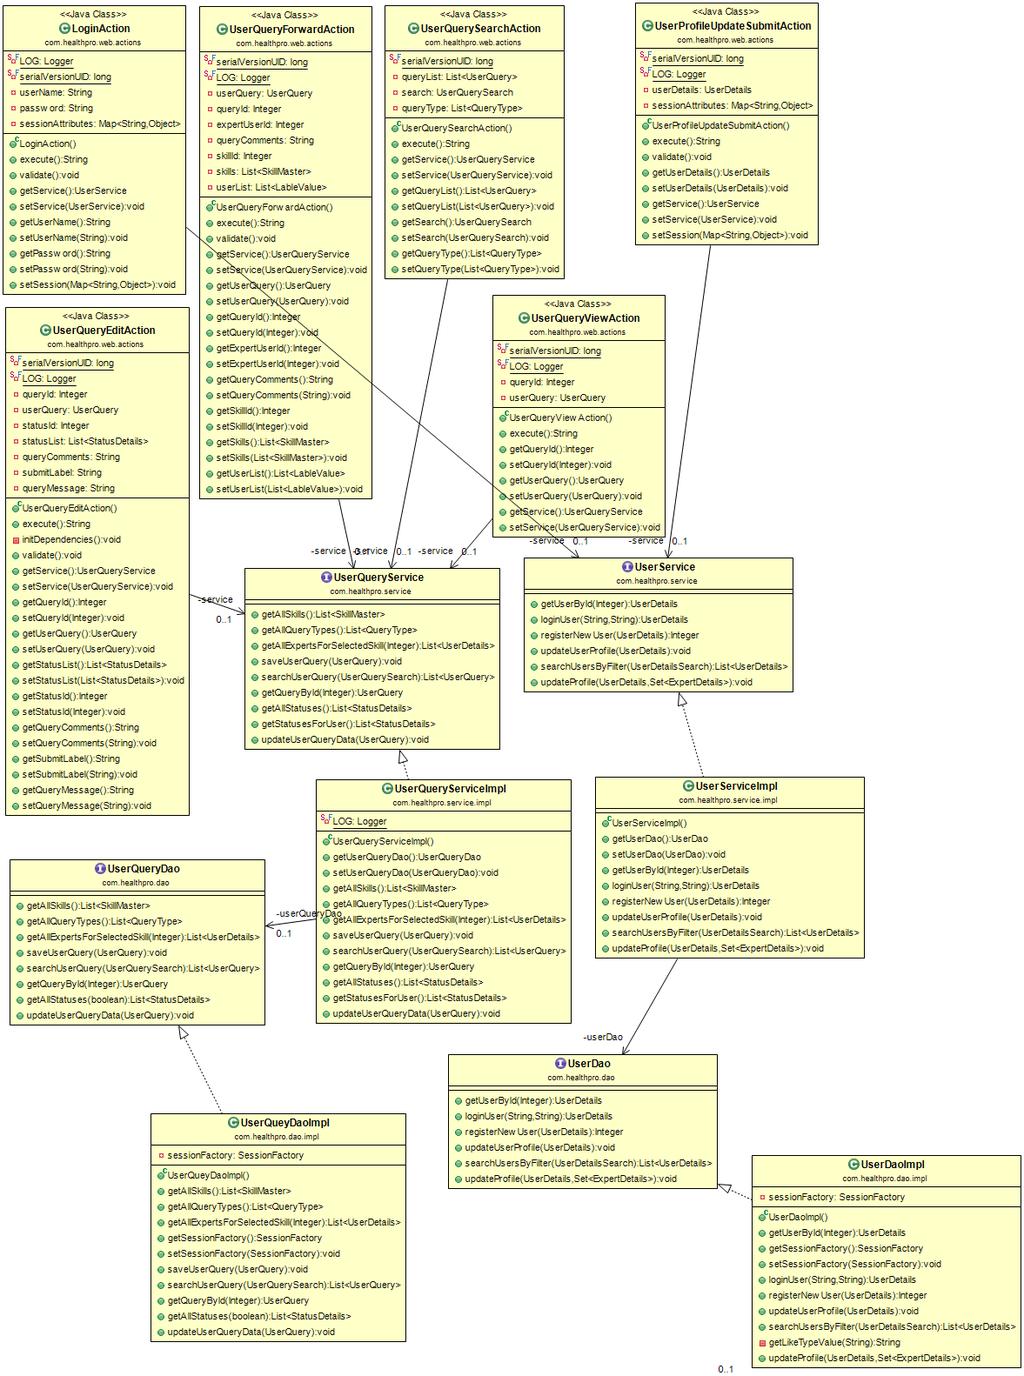 Part of the overall class diagram showing the Action, Service and Dao classes involved in achieving the Medical